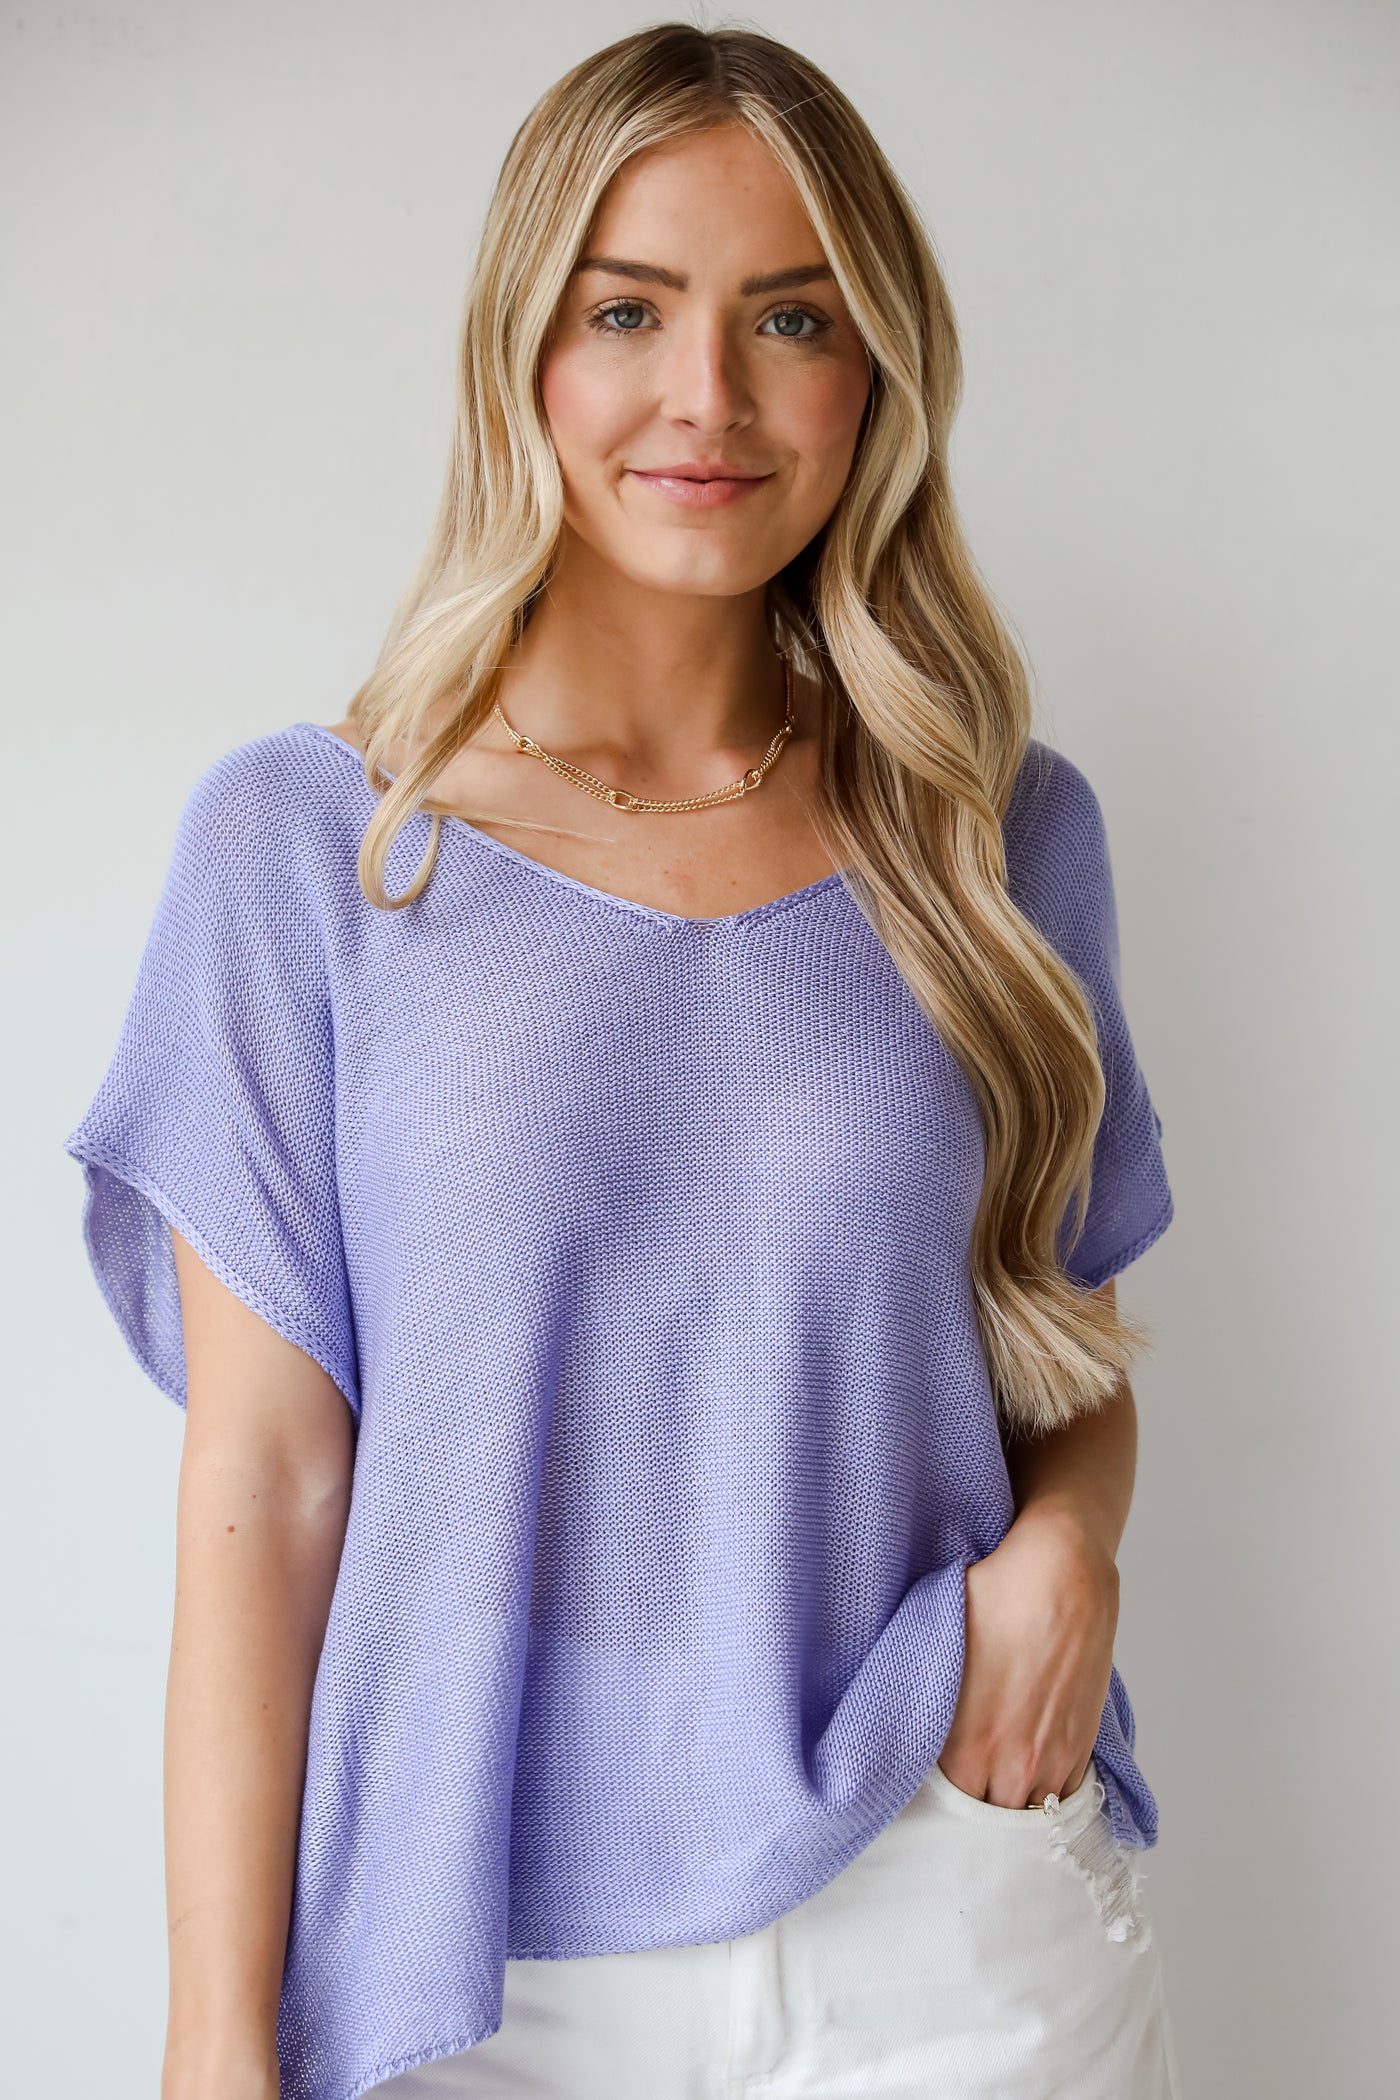 blue Lightweight Knit Top, Eliza Lightweight Knit Top is the perfect spring sweater. Lightweight knit sweater, with v-neck, short sleeves, and oversized fit. Pairs well with denim. Online boutique. 